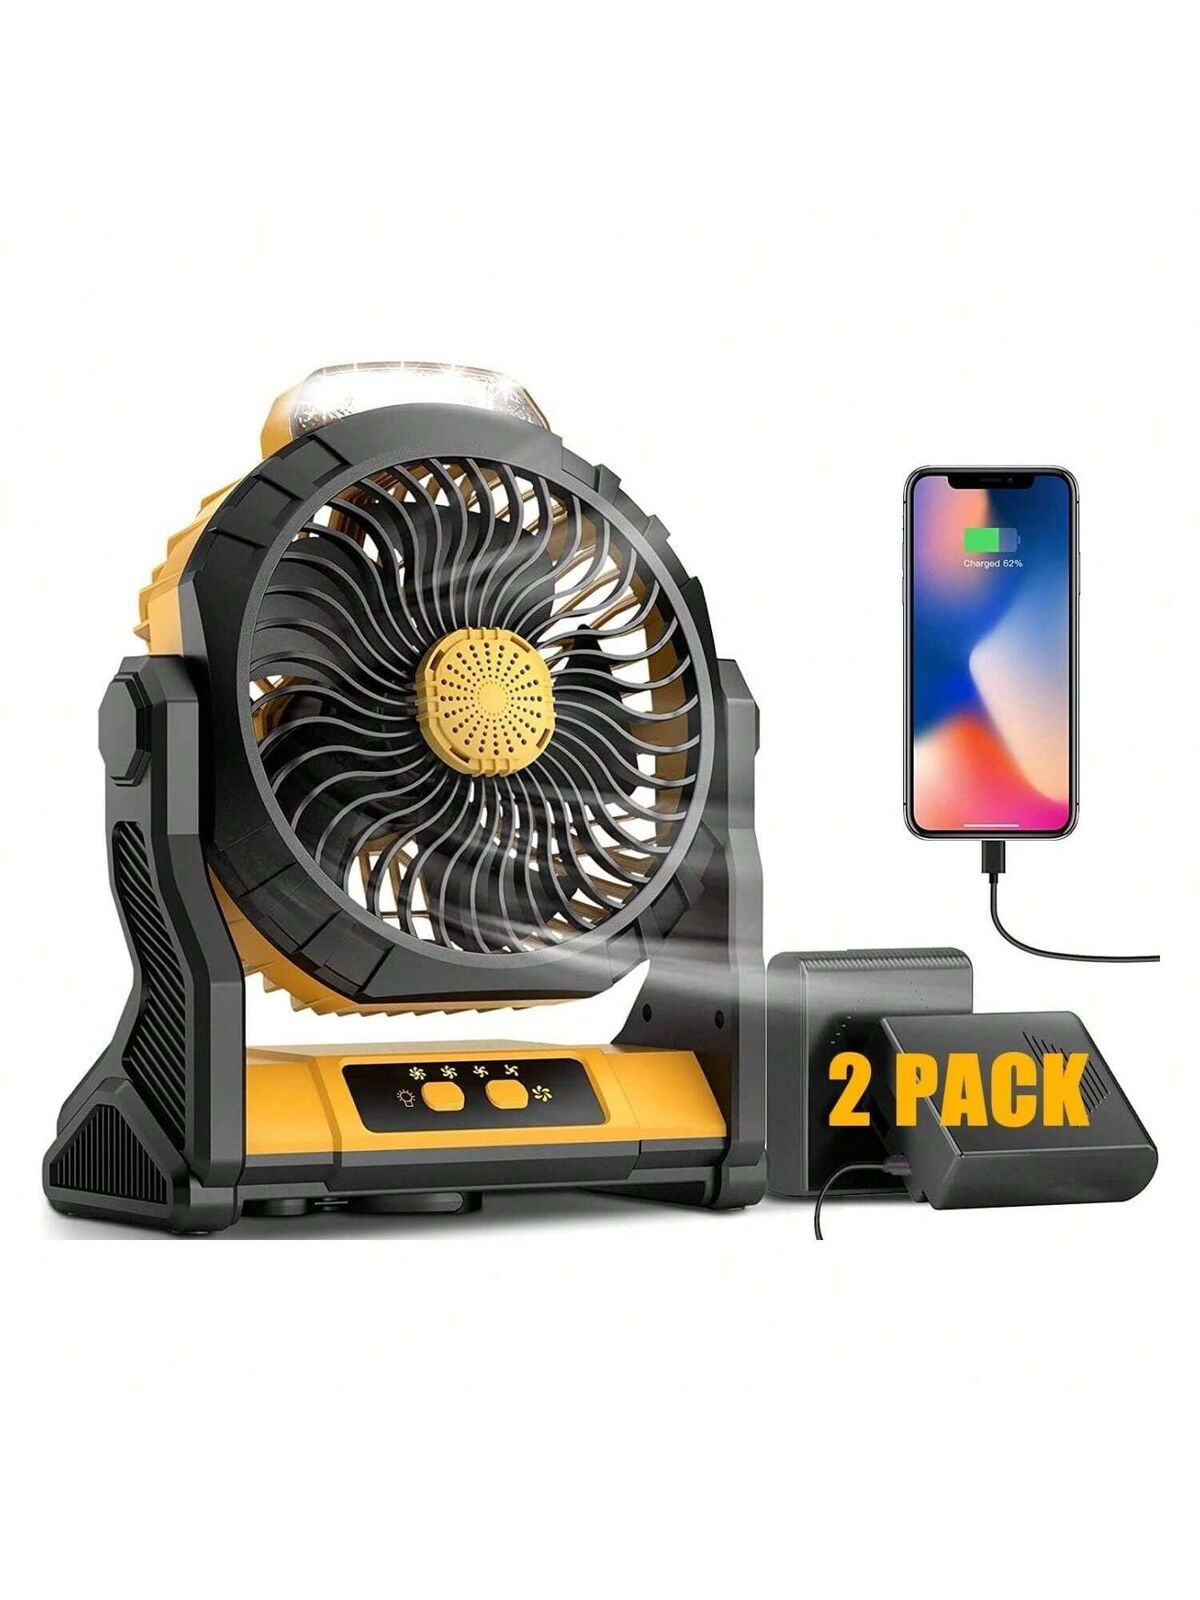 YONGSTYLE Portable Camping Fan with Lights, 20000mAh Battery Operated Fan